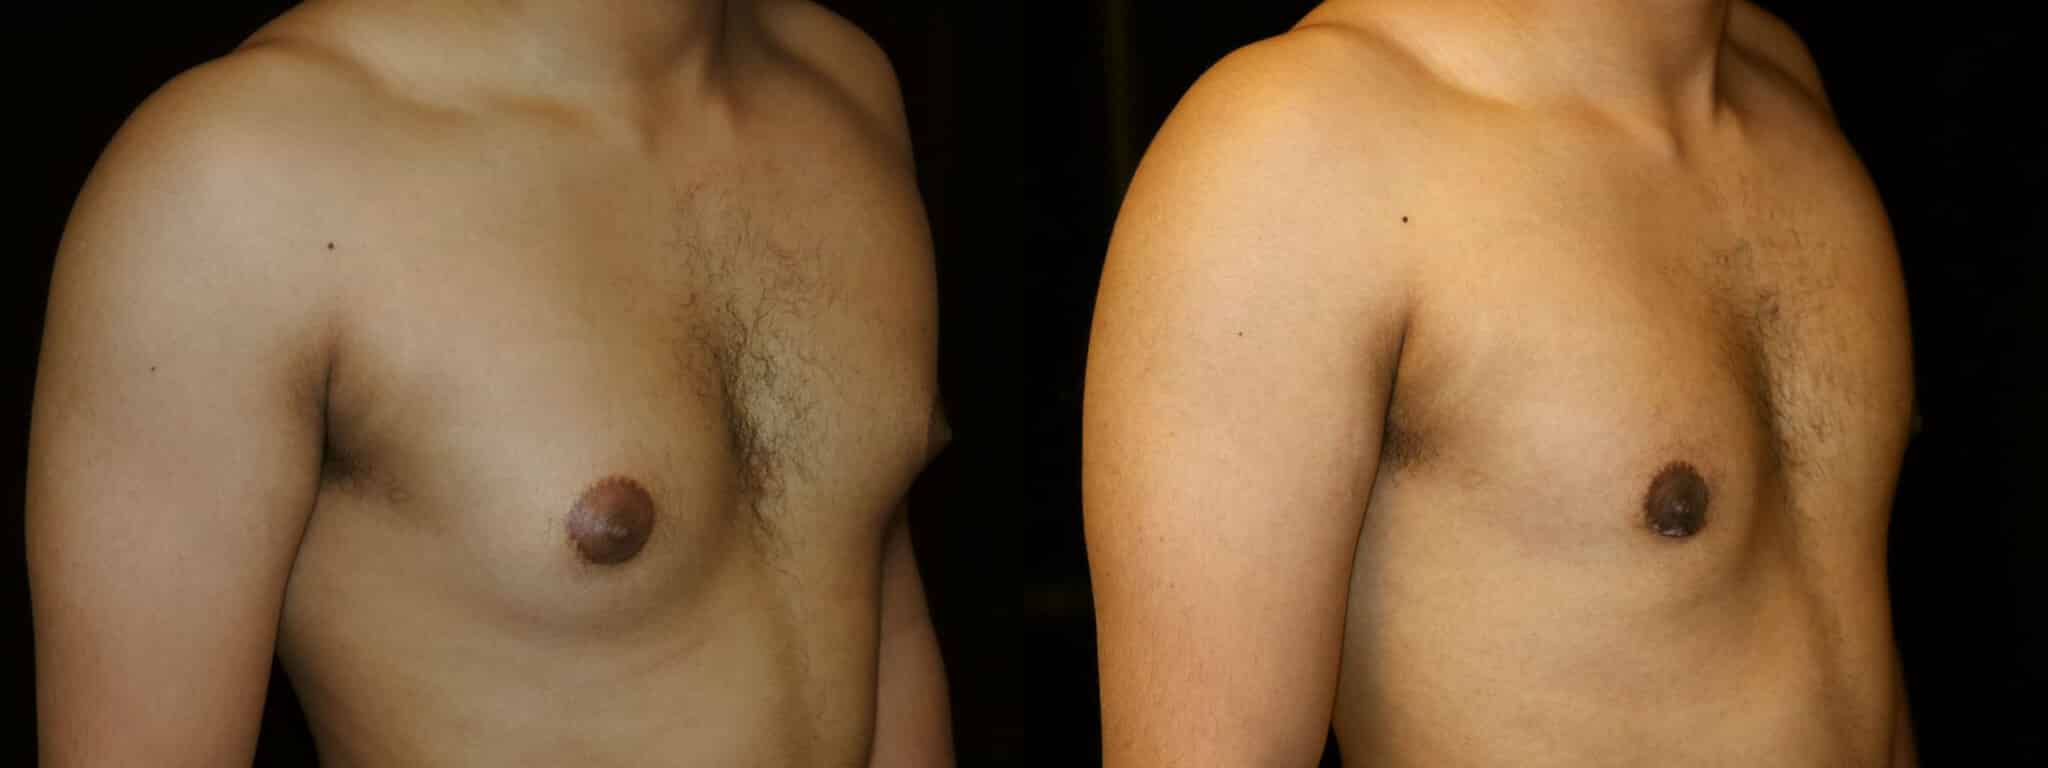 Gynecomastia Patient 15 Before & After Details